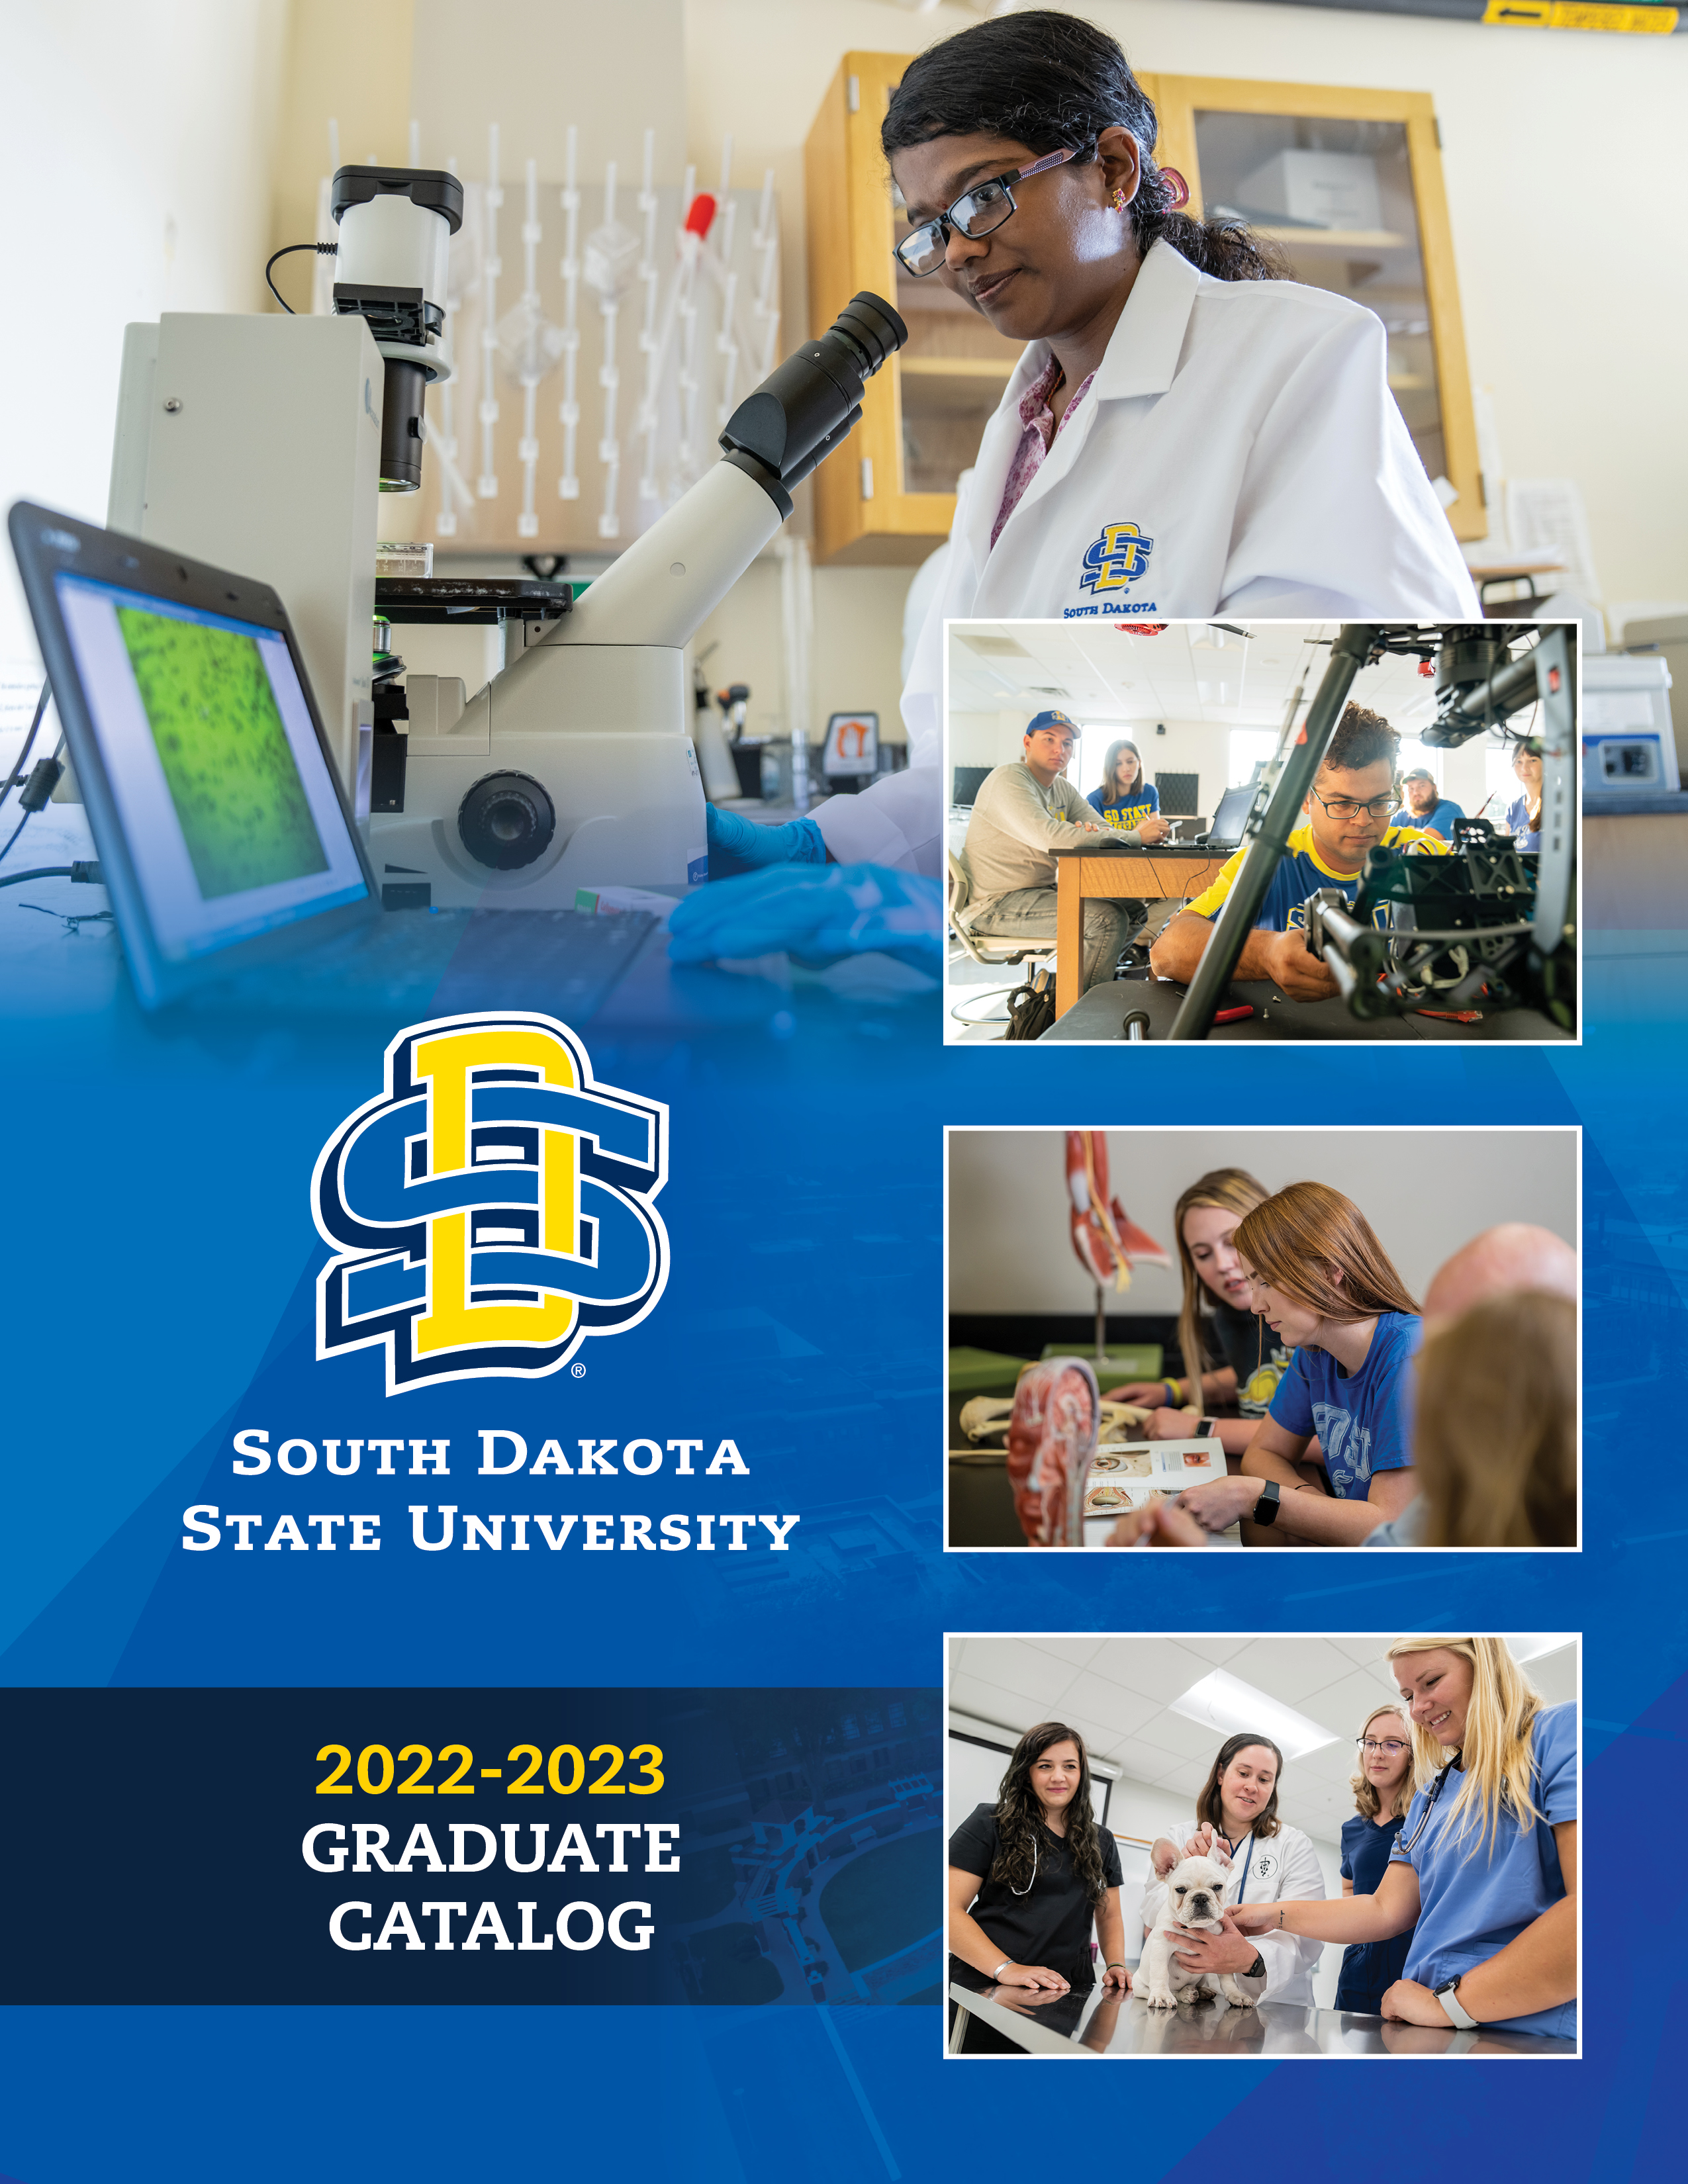 2022-2023 Graduate Catalog Cover - various views of students and faculty across campus in classrooms.